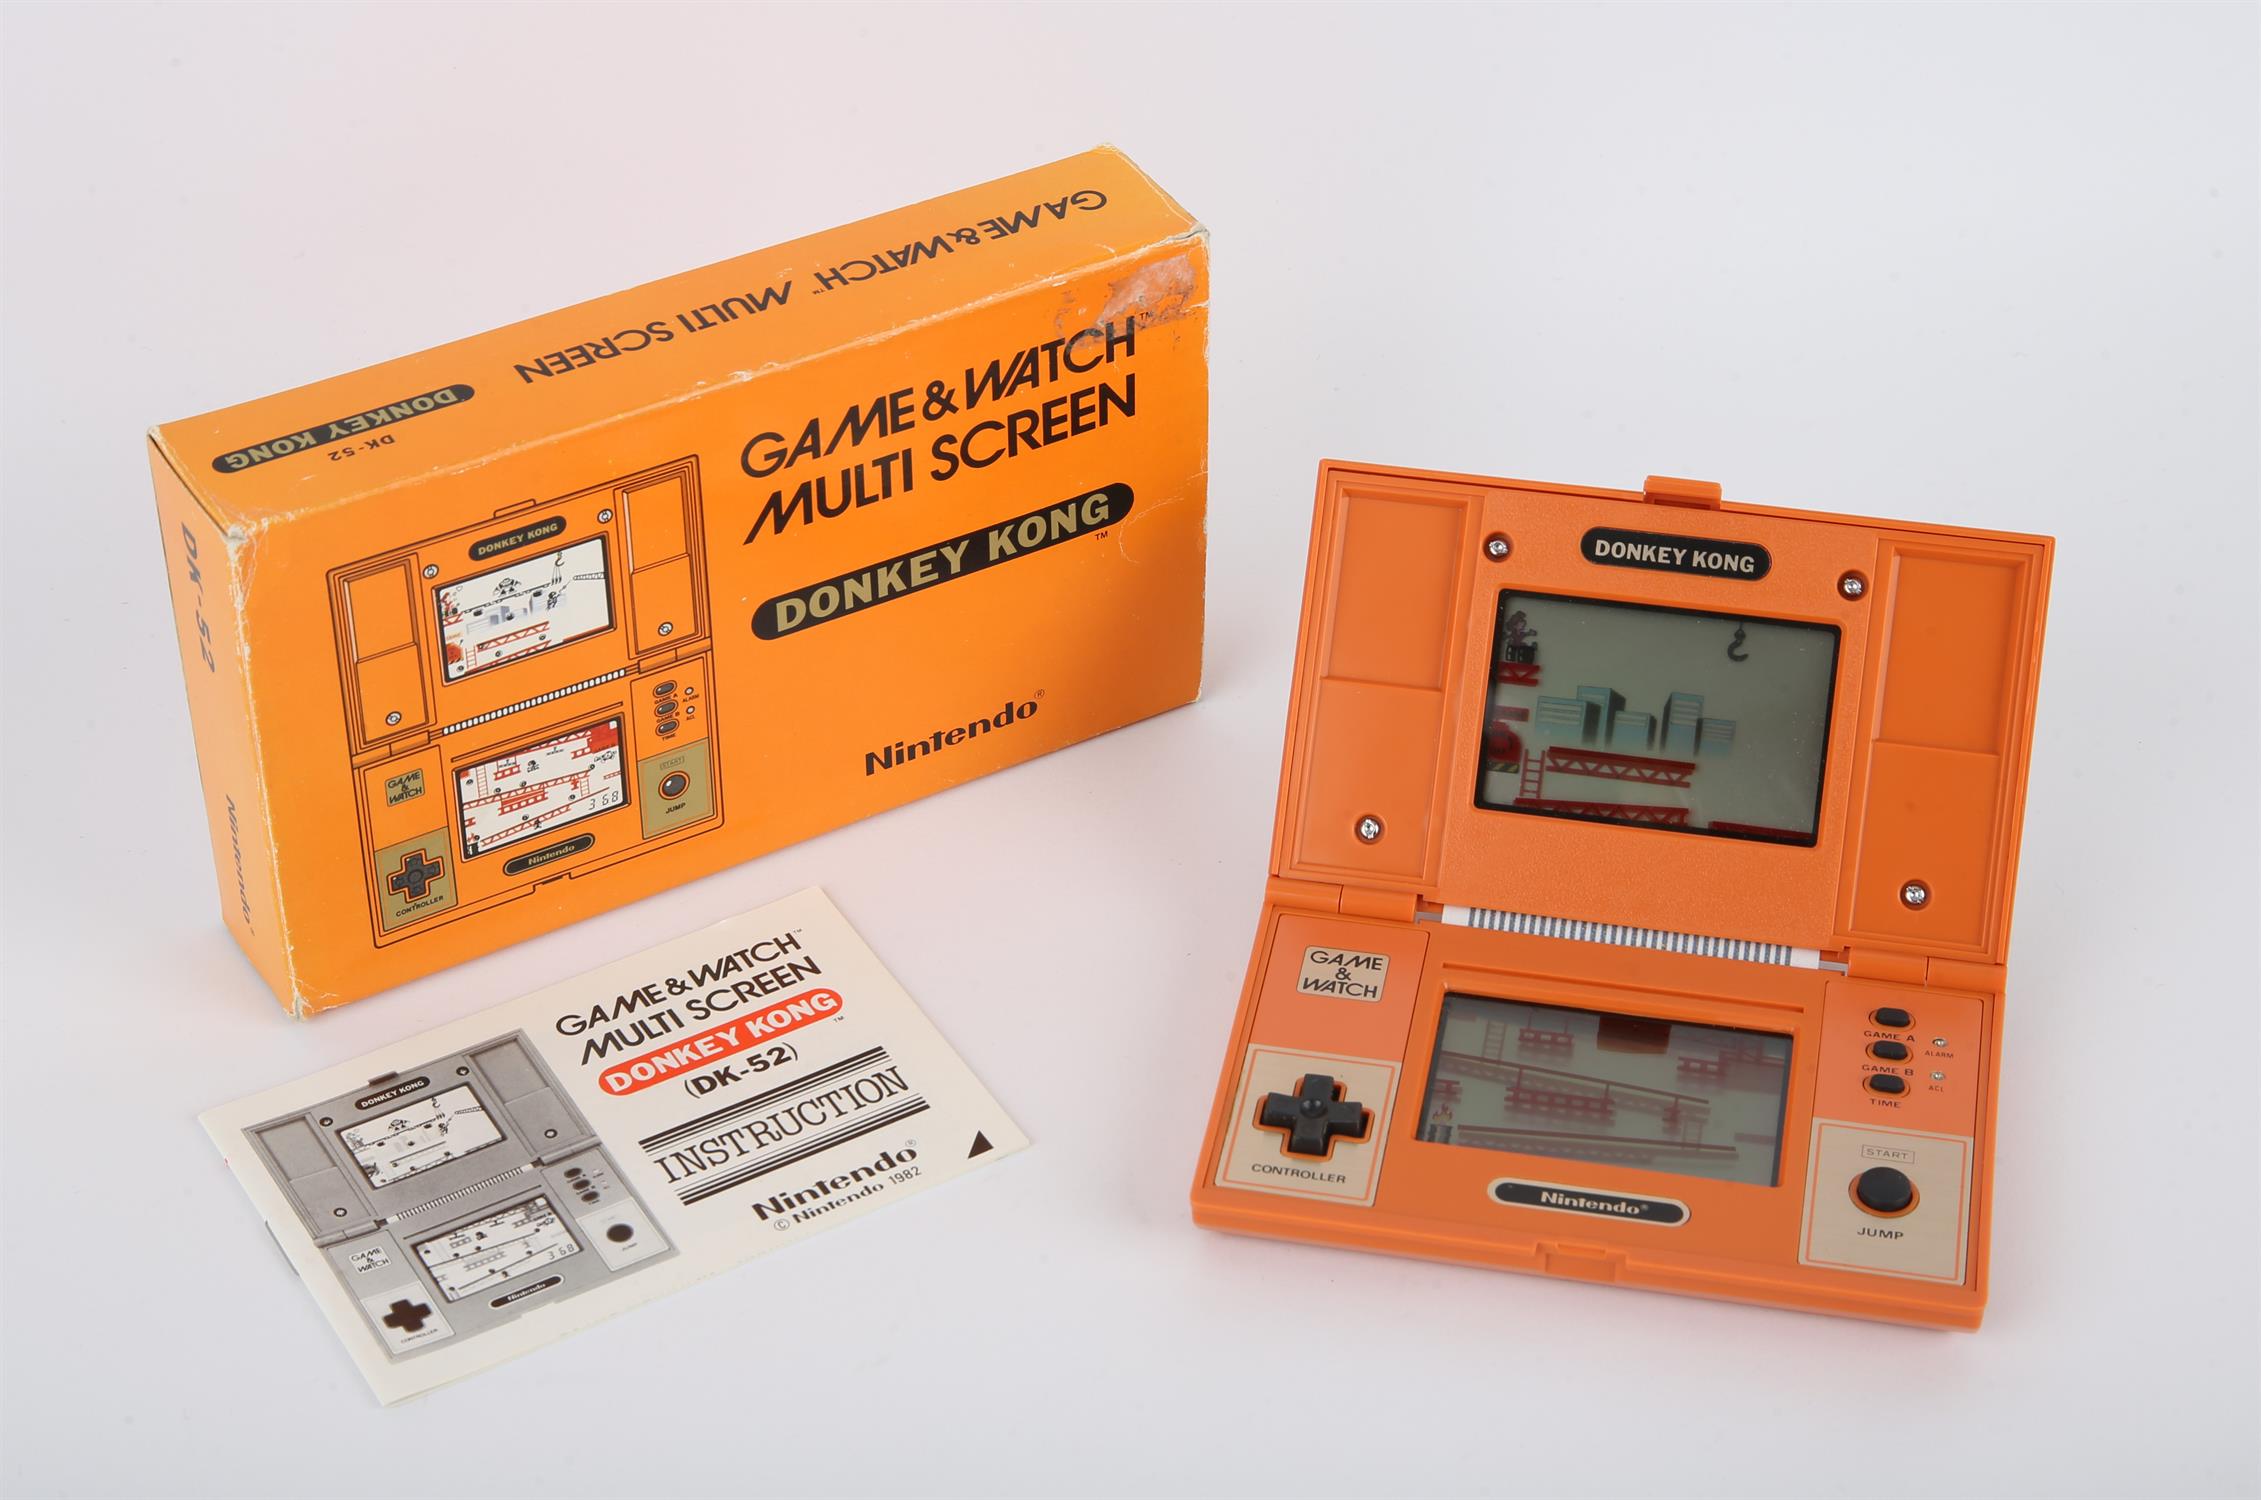 Nintendo Game & Watch Donkey Kong [DK-52] handheld console from 1982 (complete and boxed) Item is